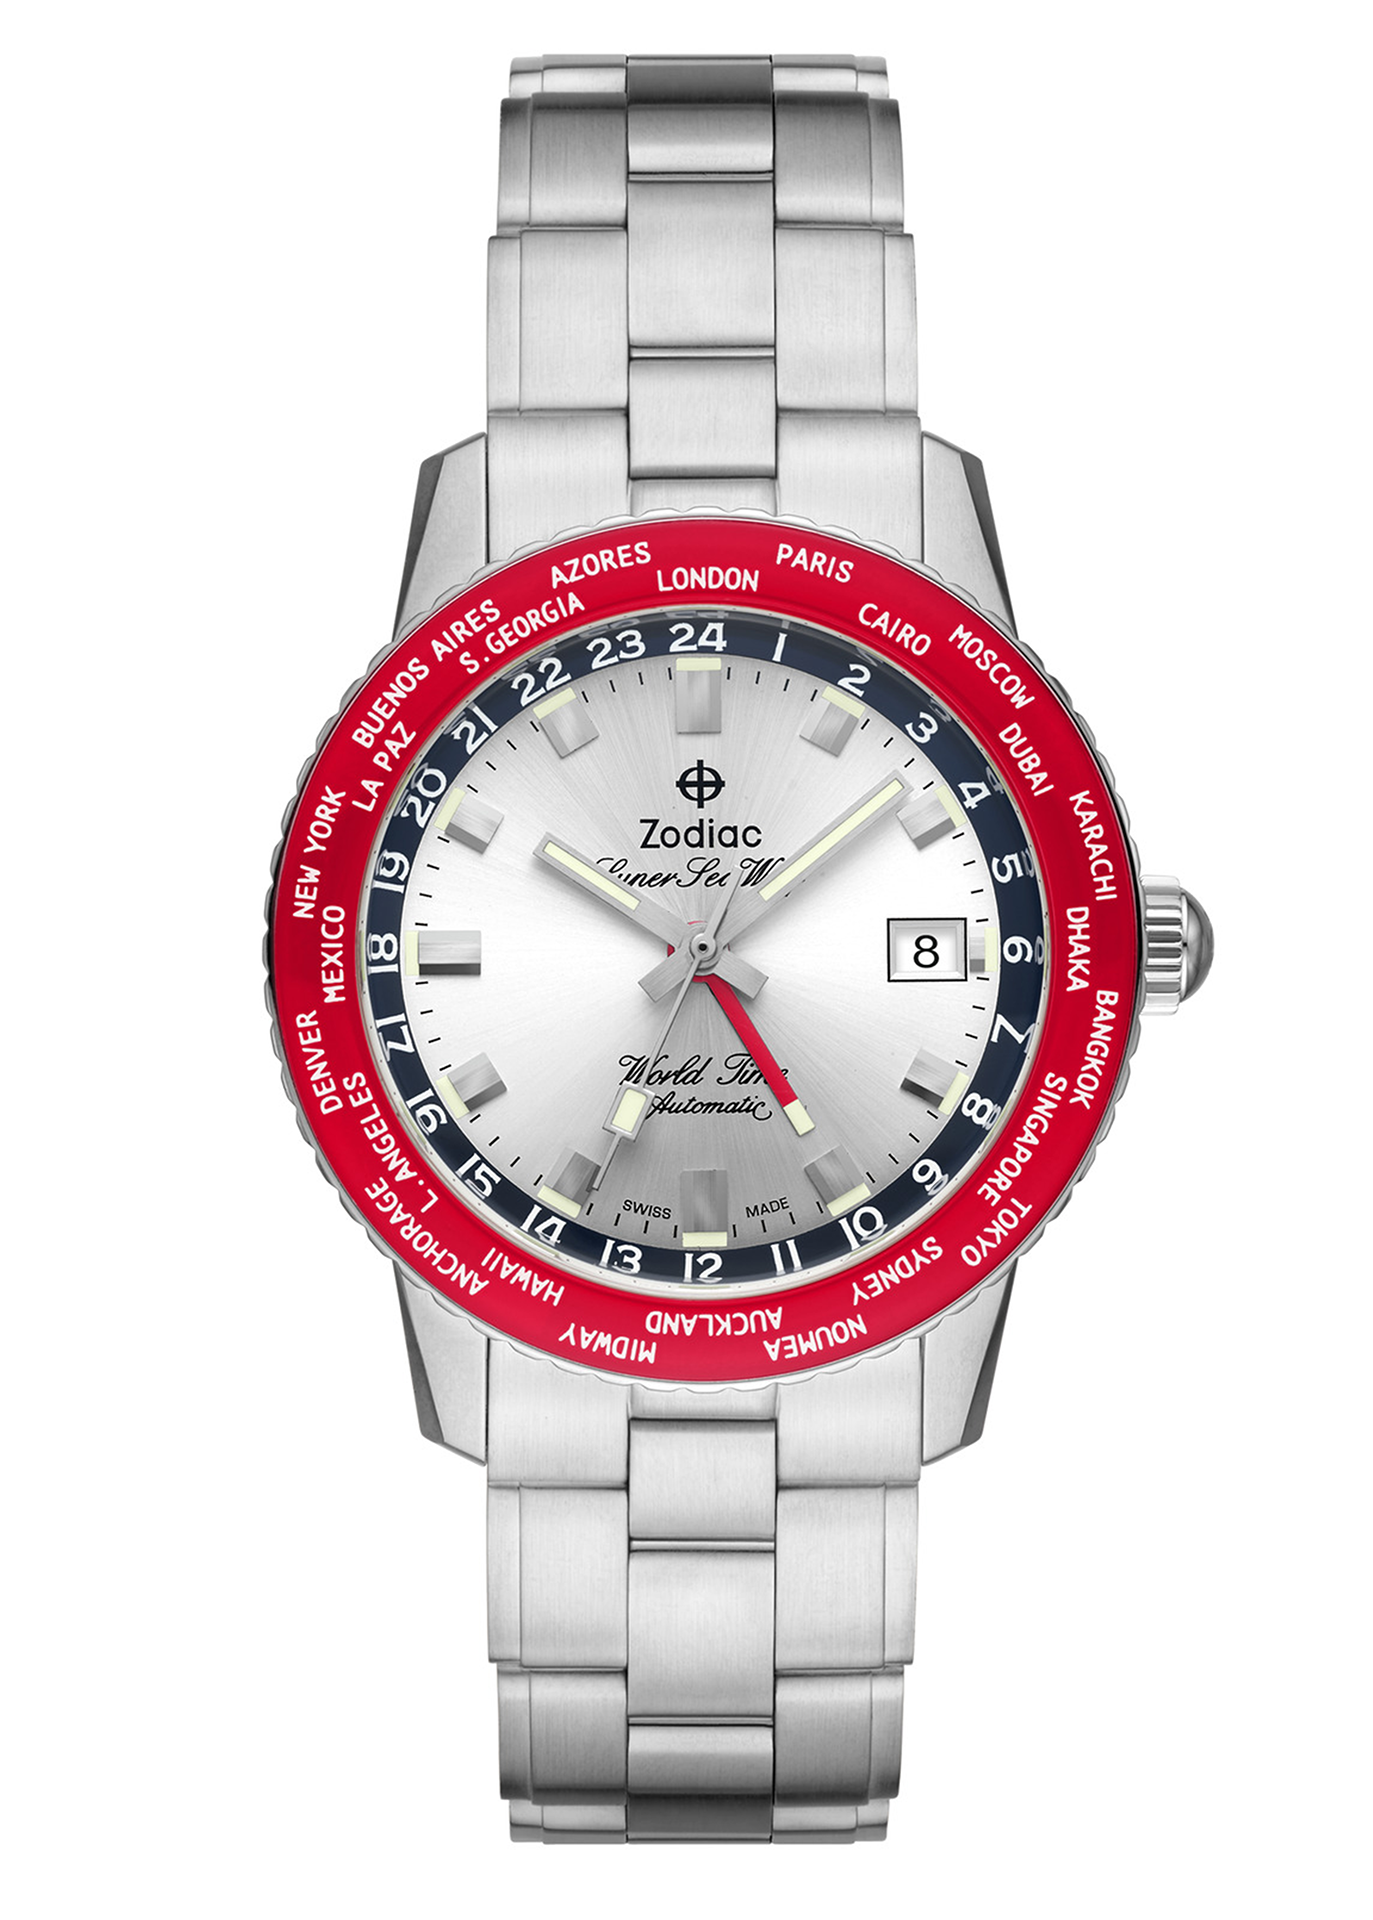 Limited Edition Super Sea Wolf World Time ZO9410 Image